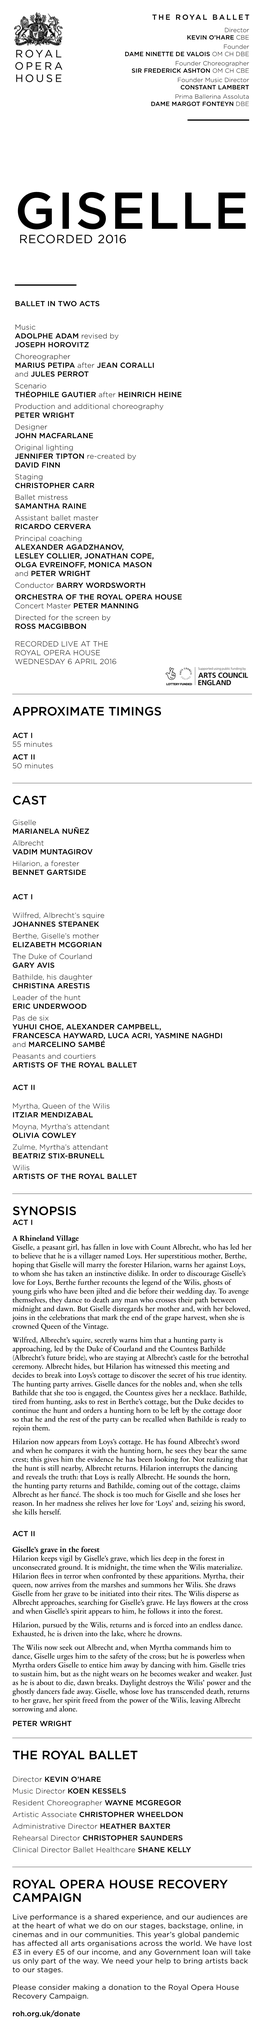 Approximate Timings Cast Synopsis the Royal Ballet